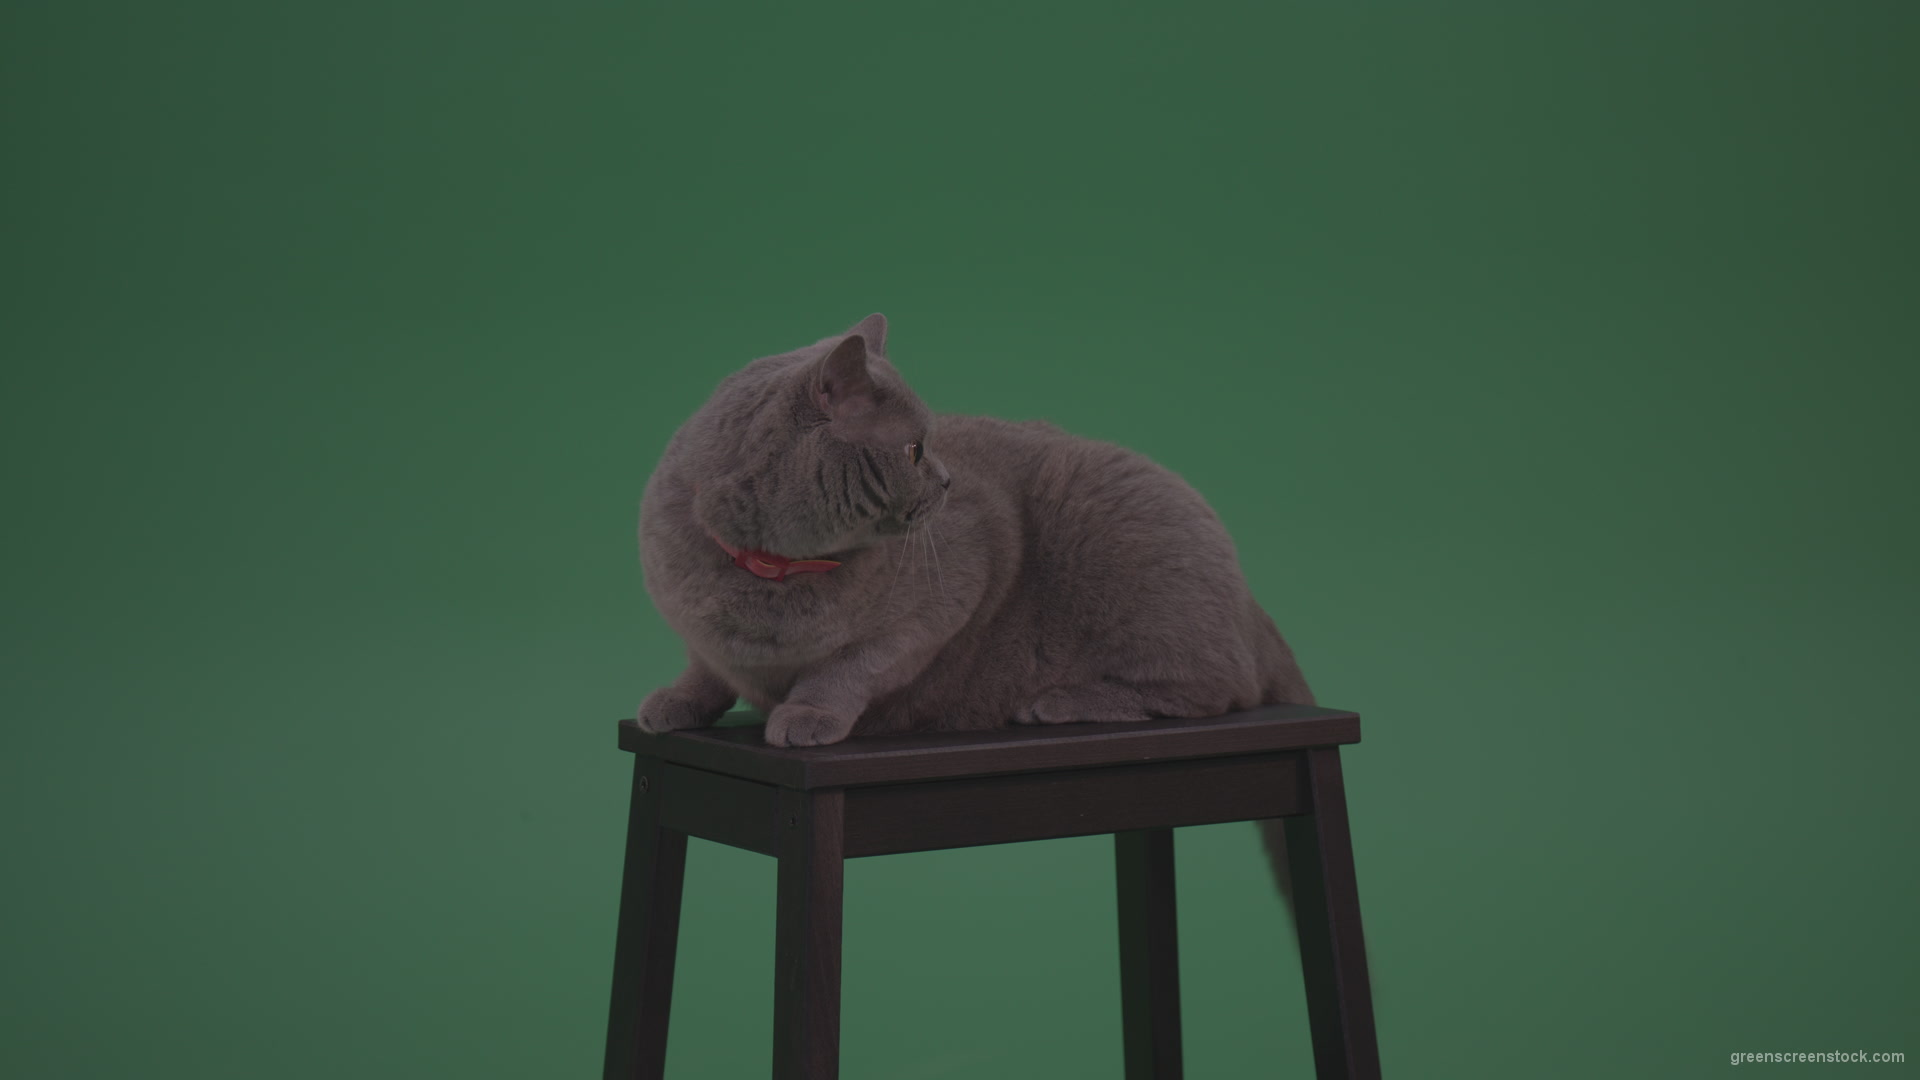 British-Gey-Cat-Sitting-On-Stool-Wagging-The-Tail-On_Green-Screen-Chroma-Key-Wall-Background_001 Green Screen Stock